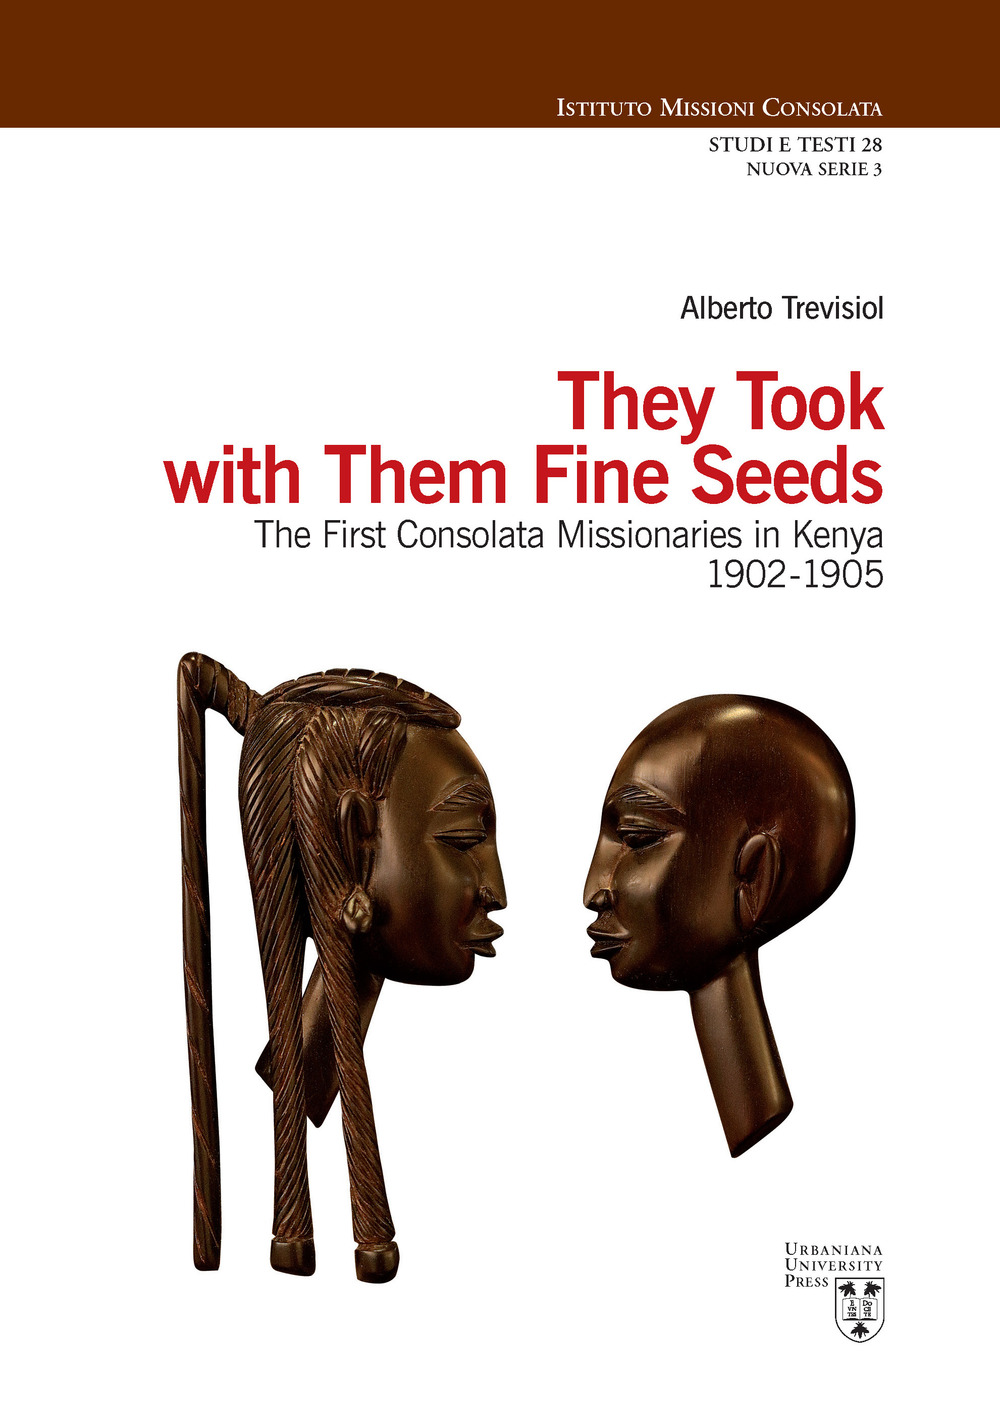 They took with them fine seeds. The first Consolata Missionaries in Kenya 1902-1905